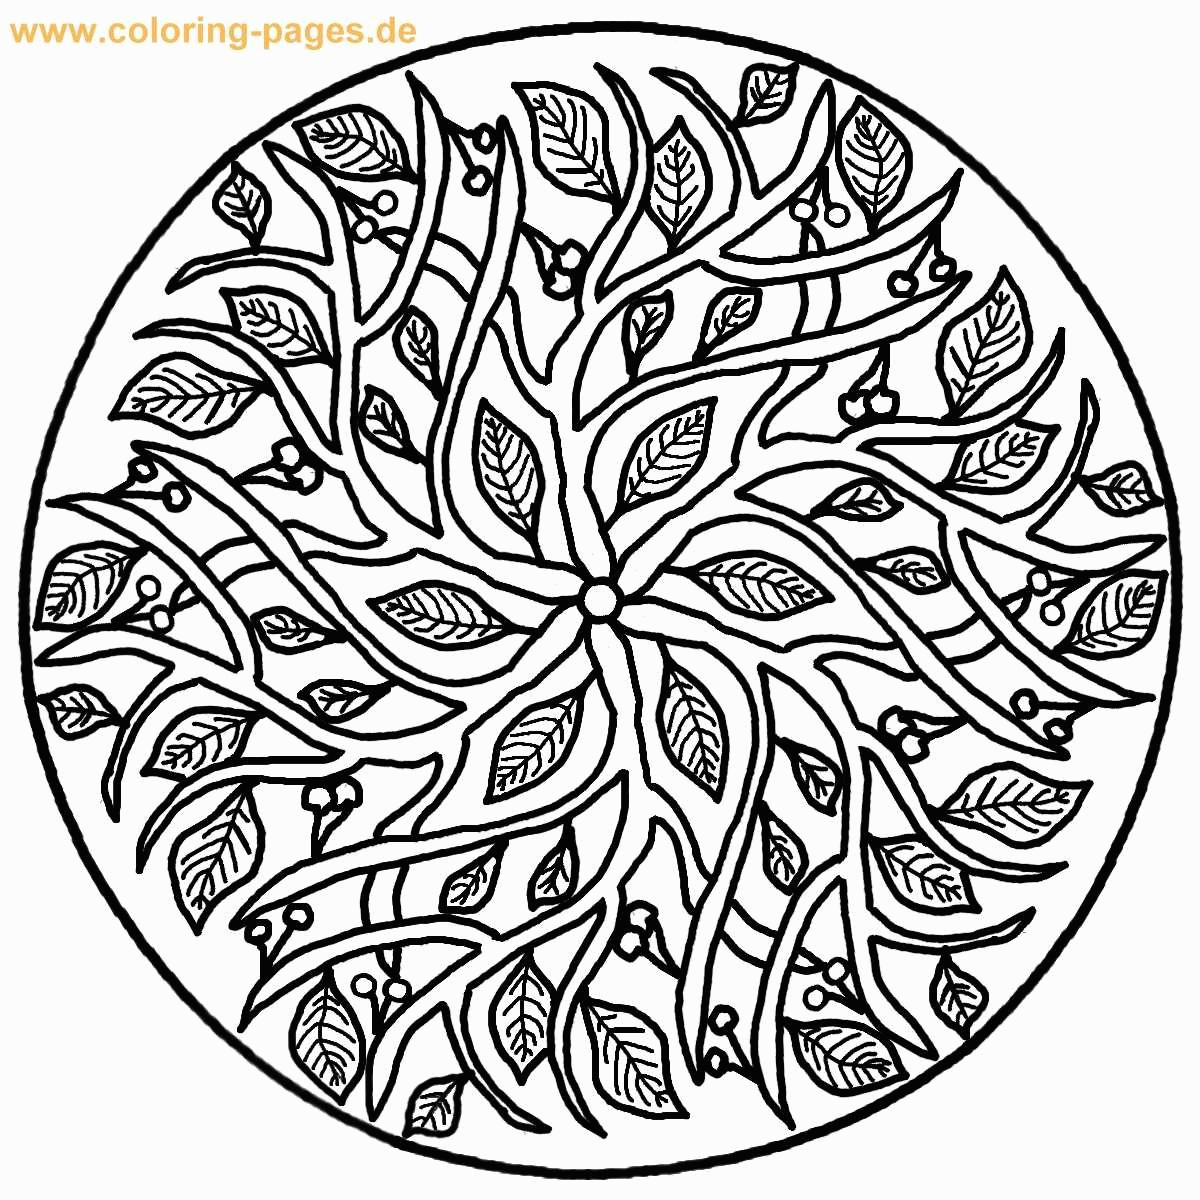 Hard To Print - Coloring Pages for Kids and for Adults